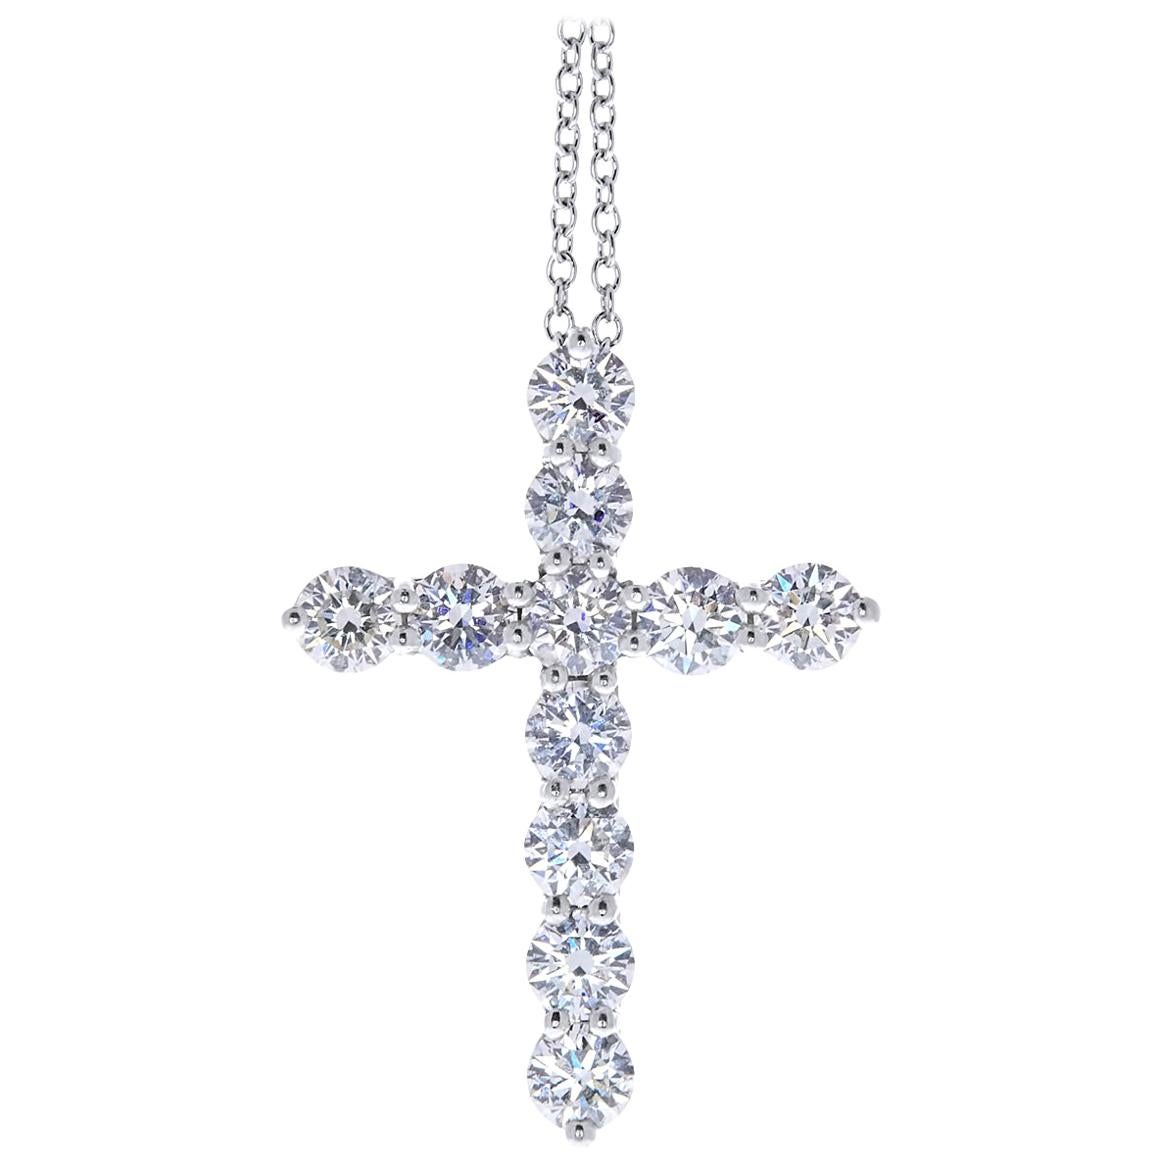 Certified 1.25 Carat Round Diamond Cross Pendant and Necklace in 14 Karat Gold For Sale